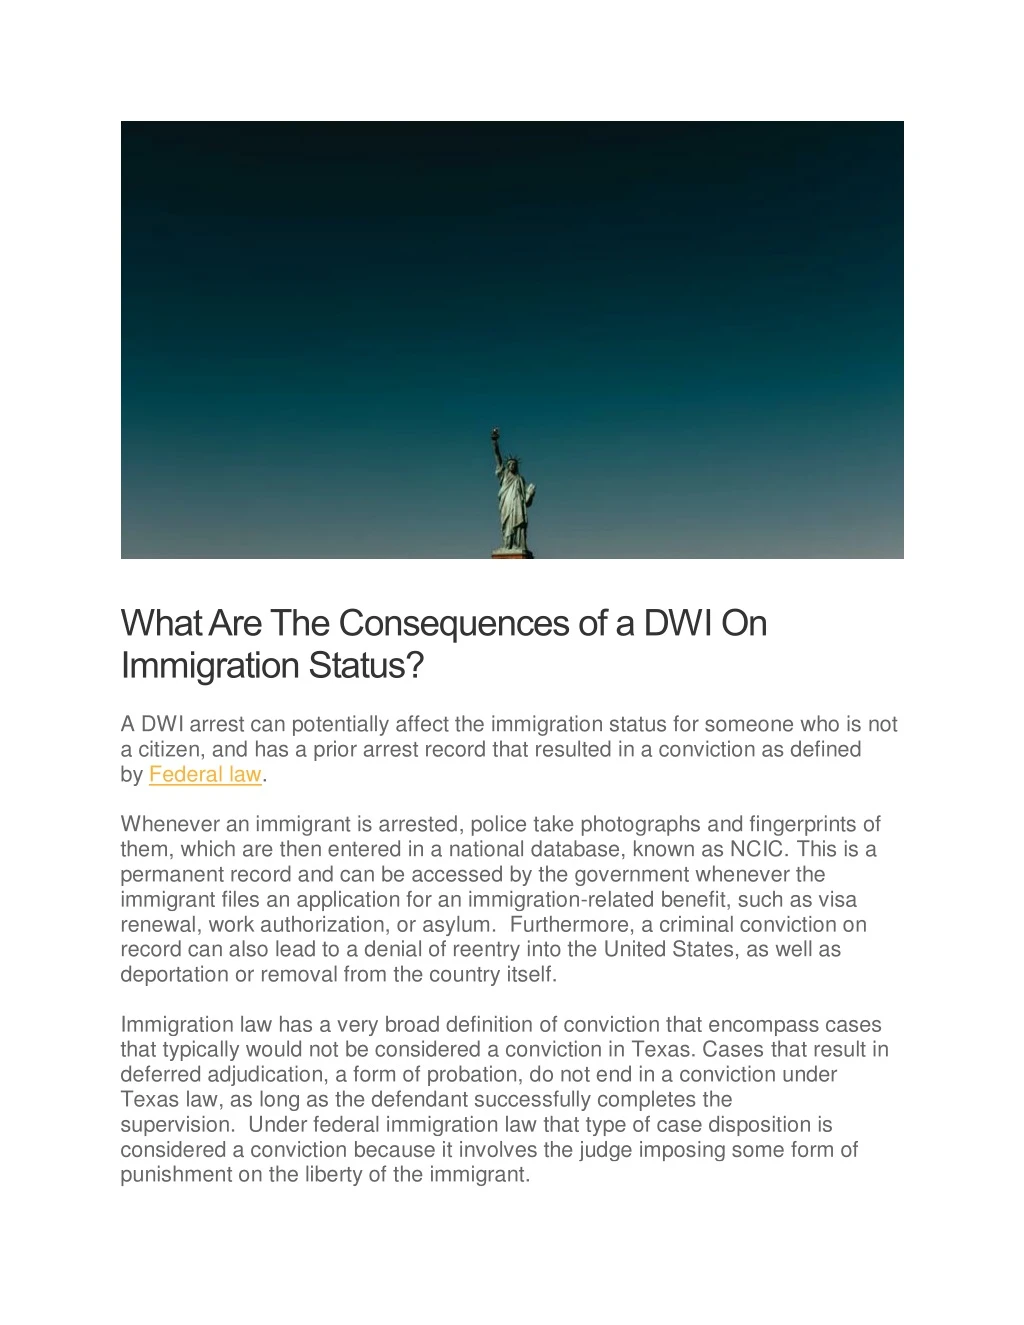 what are the consequences of a dwi on immigration